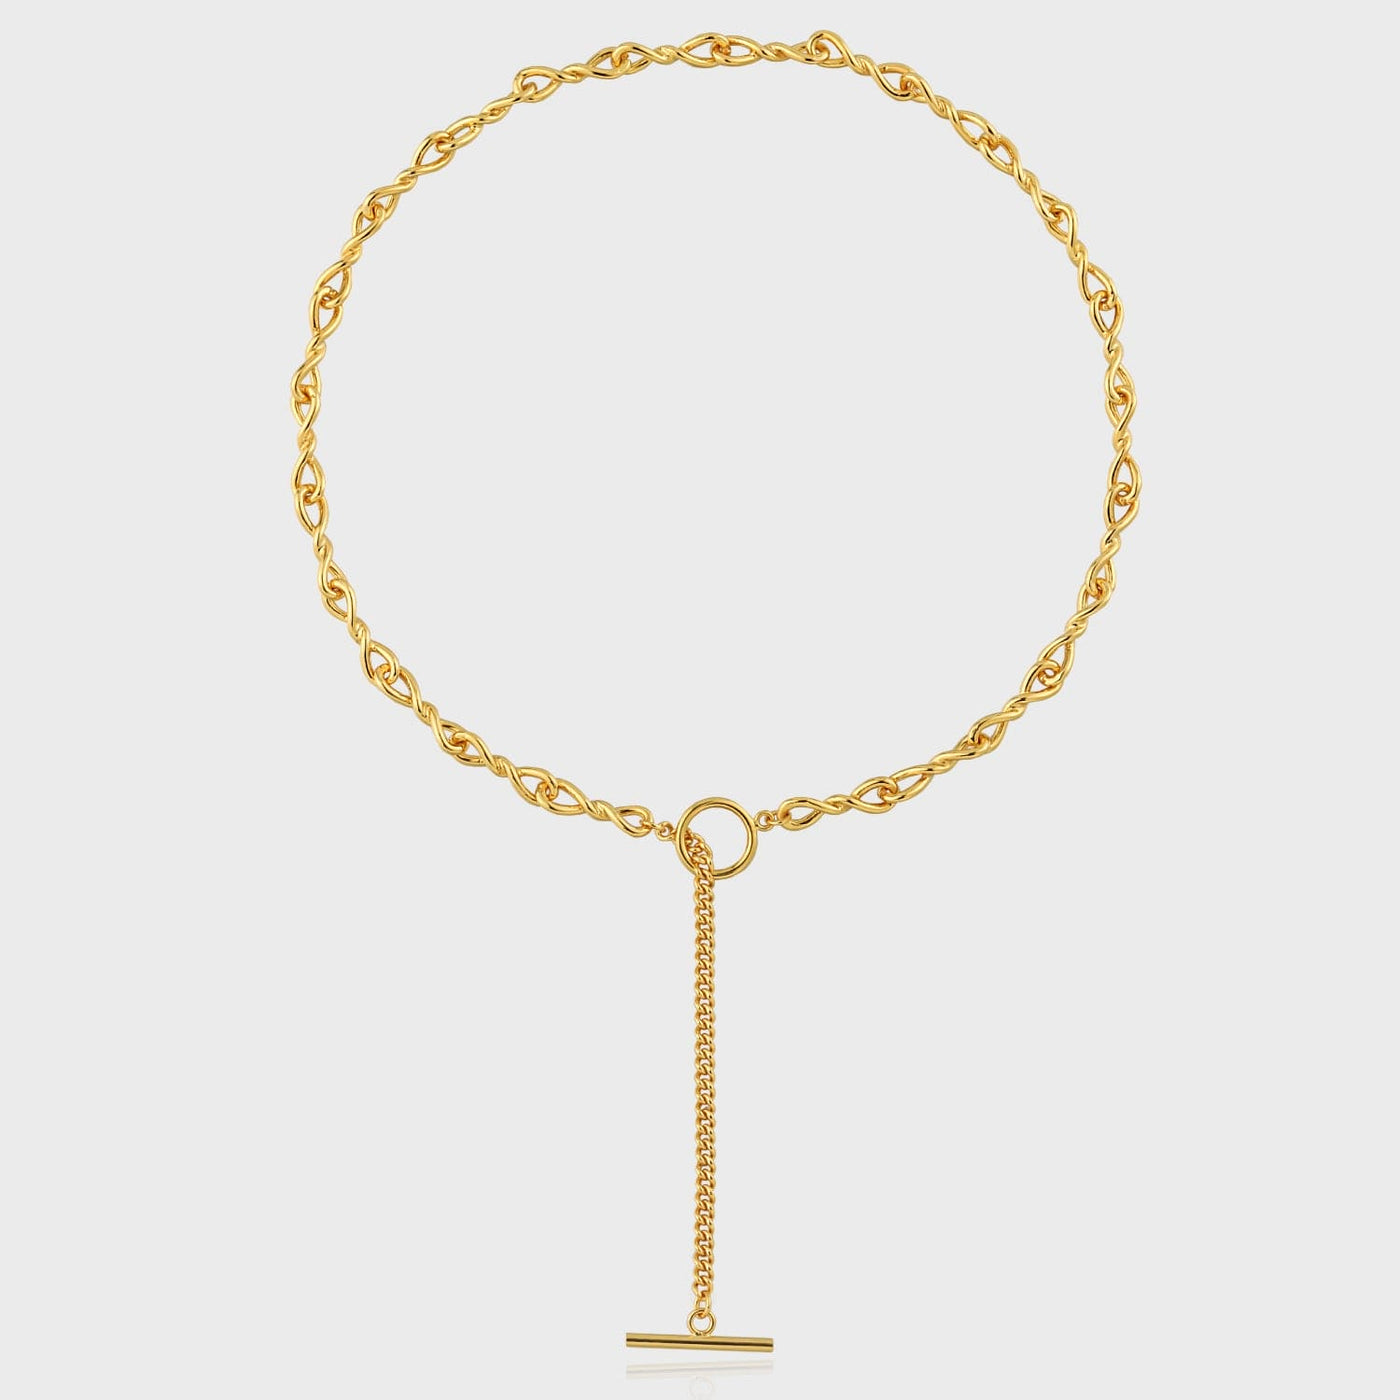 nolo rich OT toggle clasp lariat style choker gold plated sterling silver spiral twist chain drop necklace